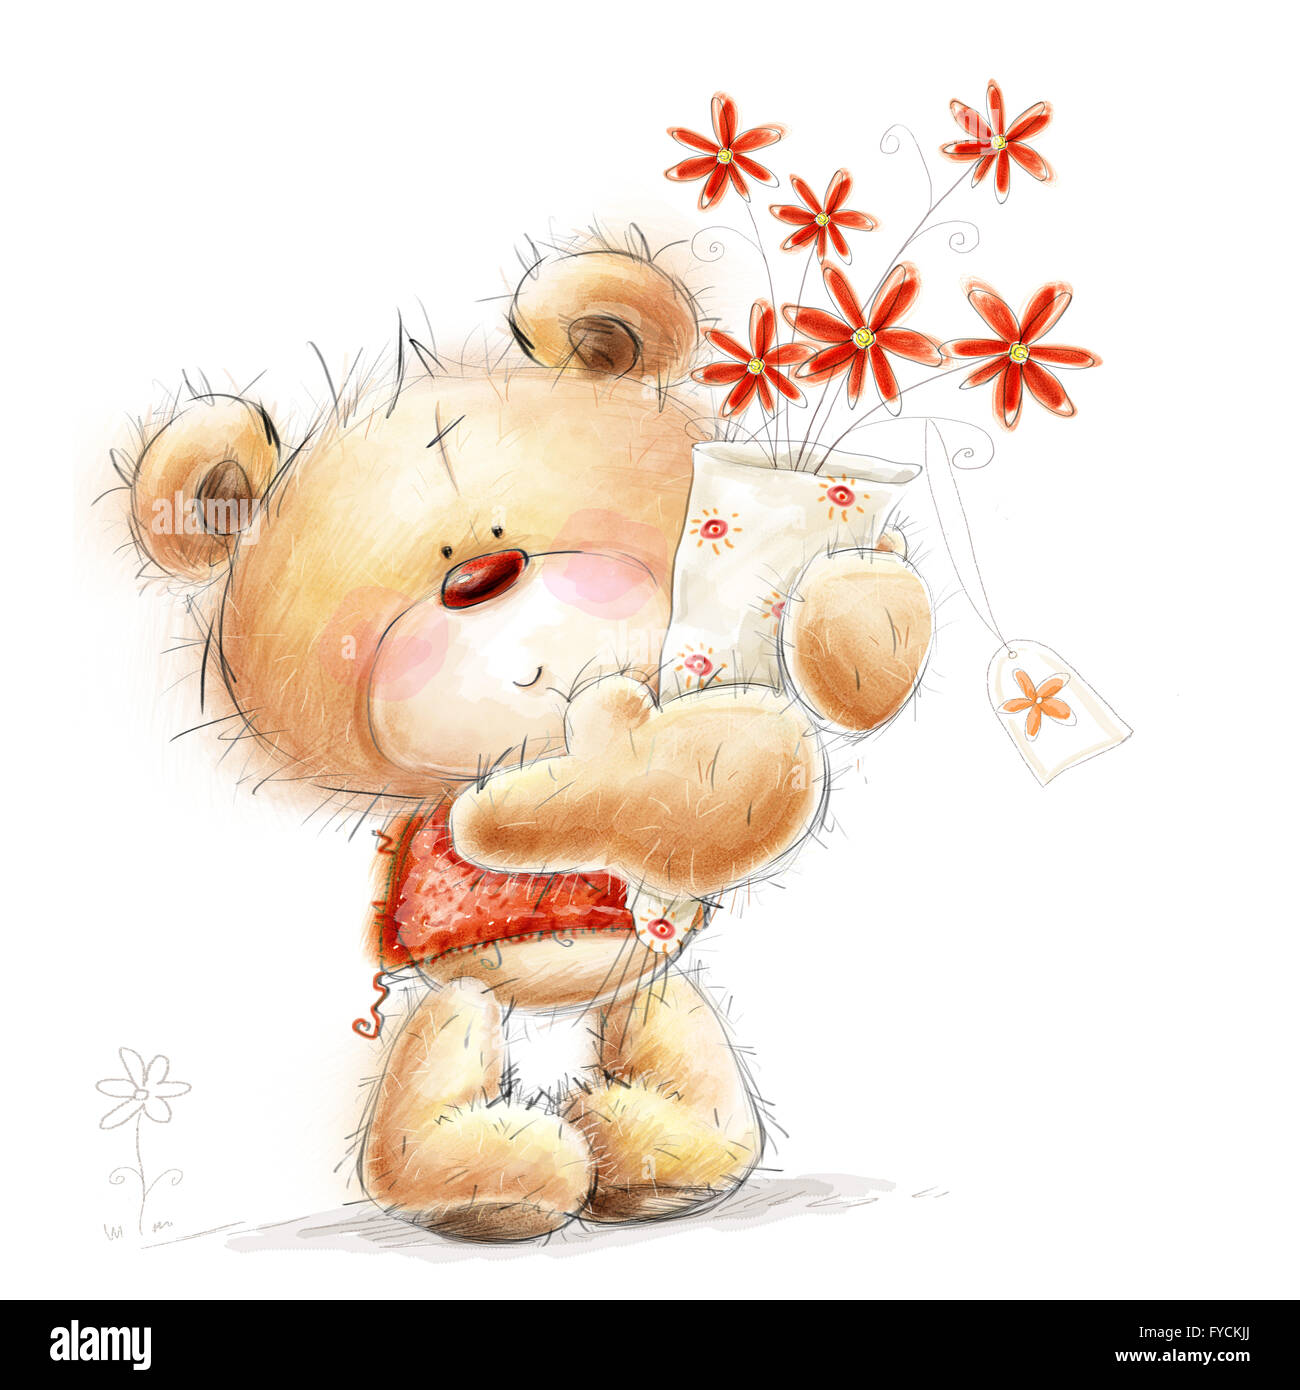 Cute Teddy bear with the red flowers. Background with bear and flowers. Hand drawn teddy bear isolated on white background. Stock Photo